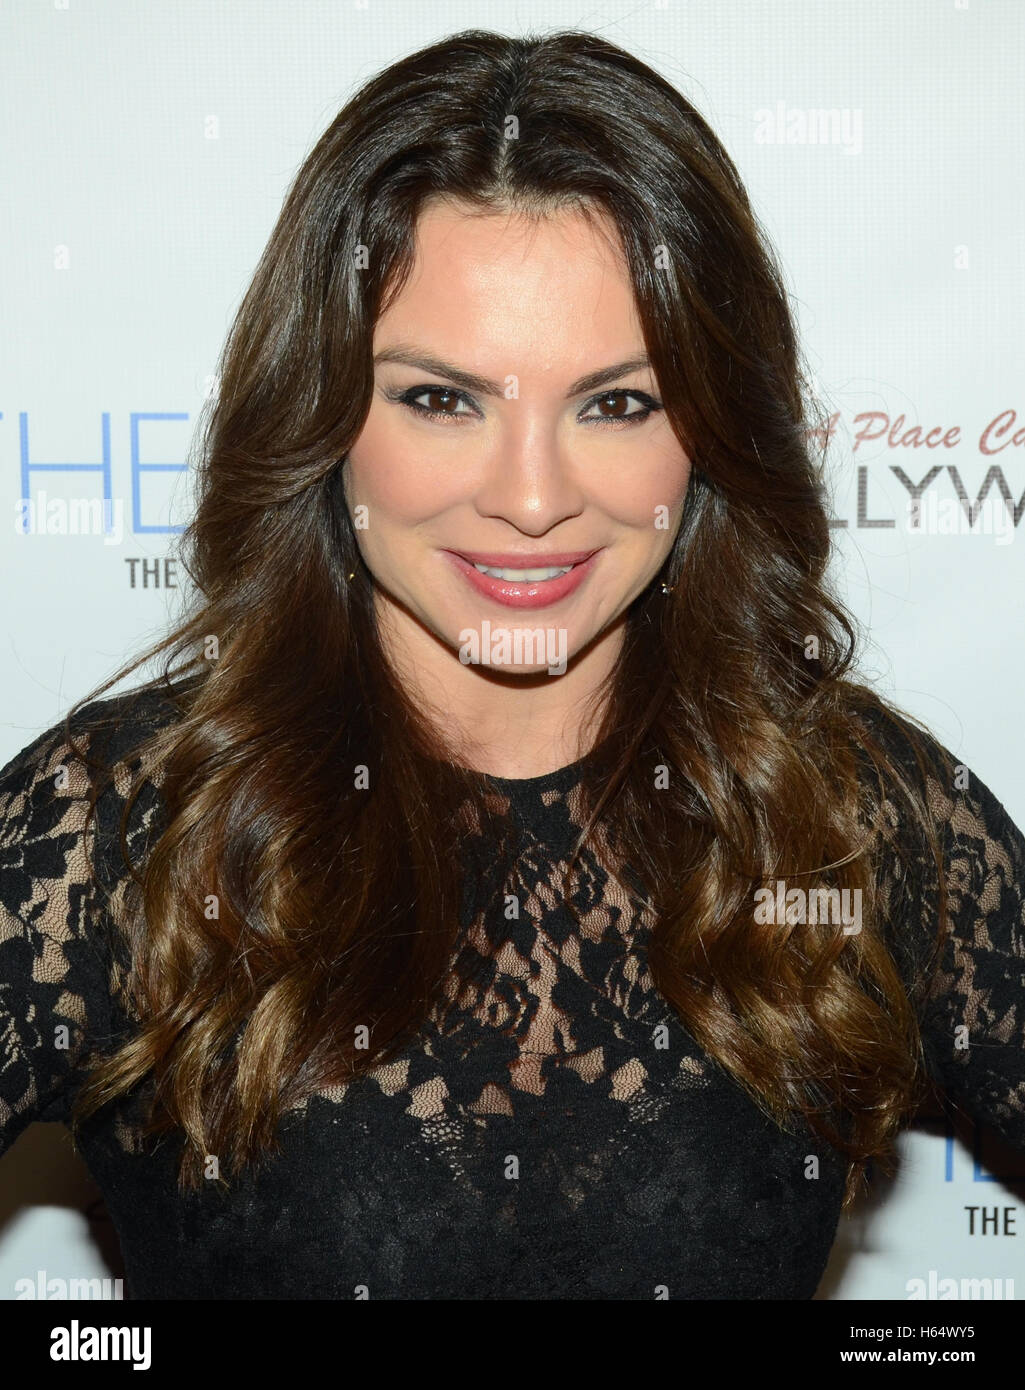 Lilly Melgar attends the 5th Annual LANY Entertainment Mixer at St. Felix on March 10, 2016 in Hollywood, California. Stock Photo